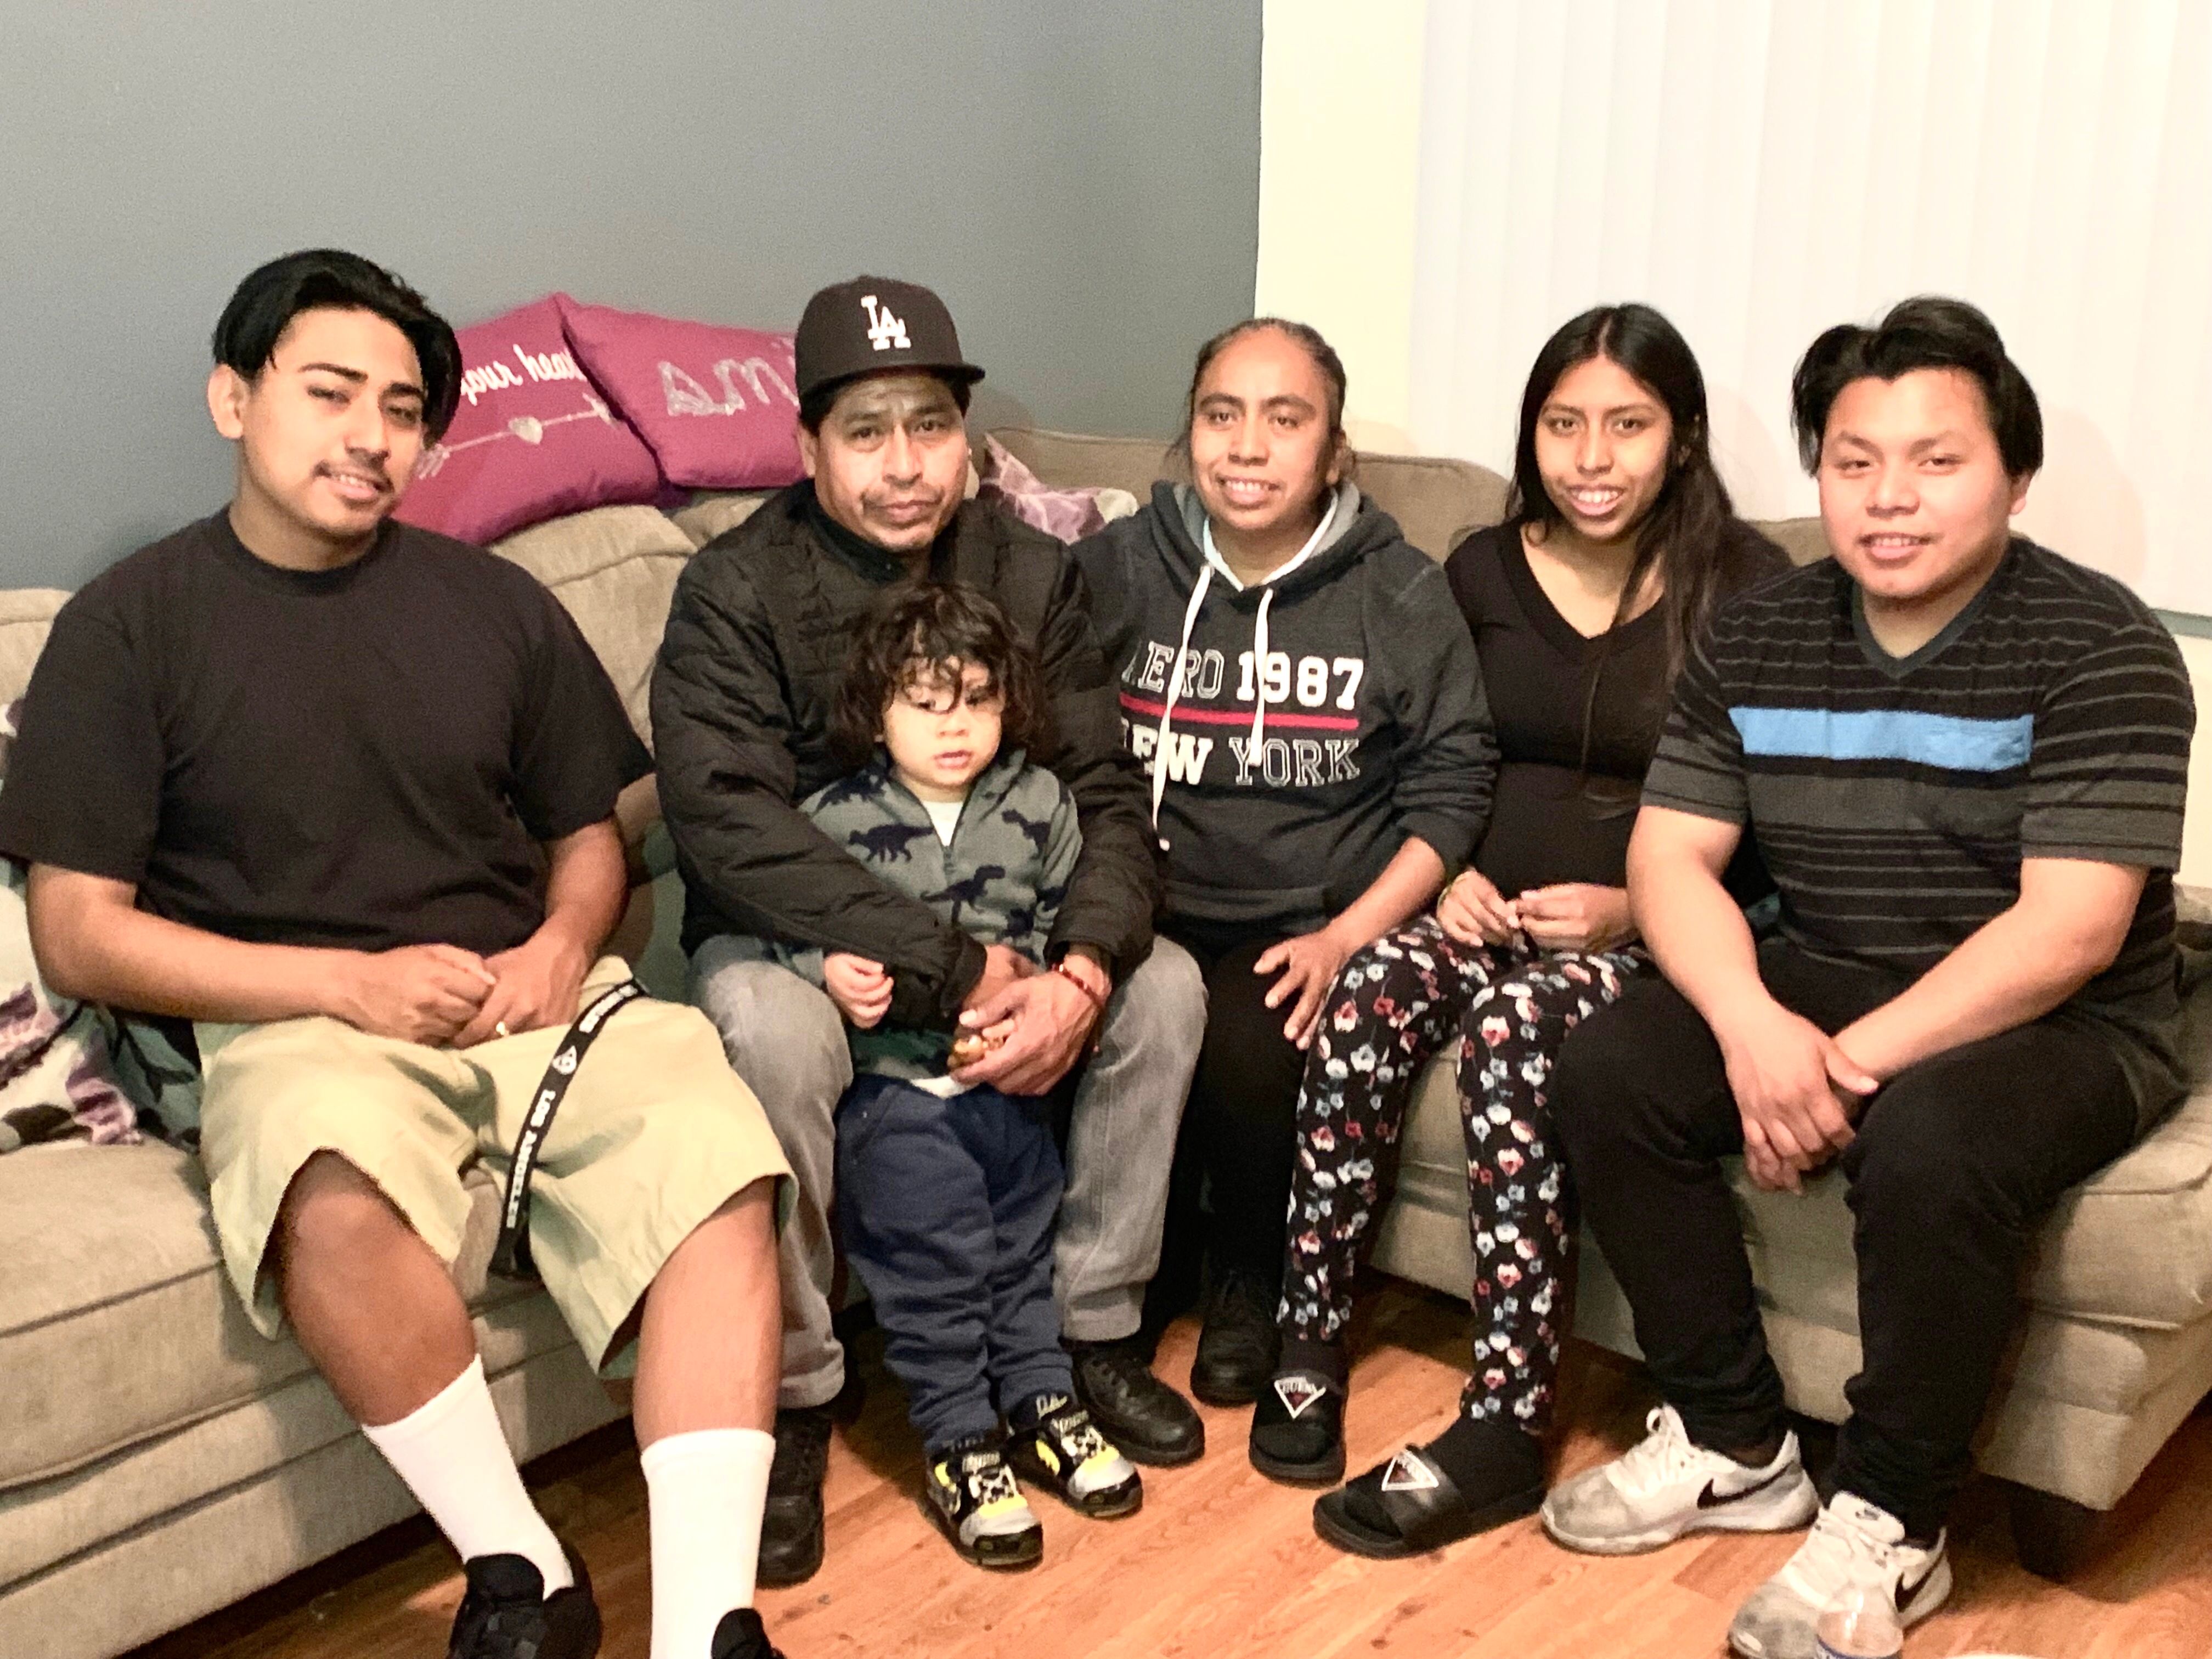 FSC, Bresee support Martinez family through tragedy